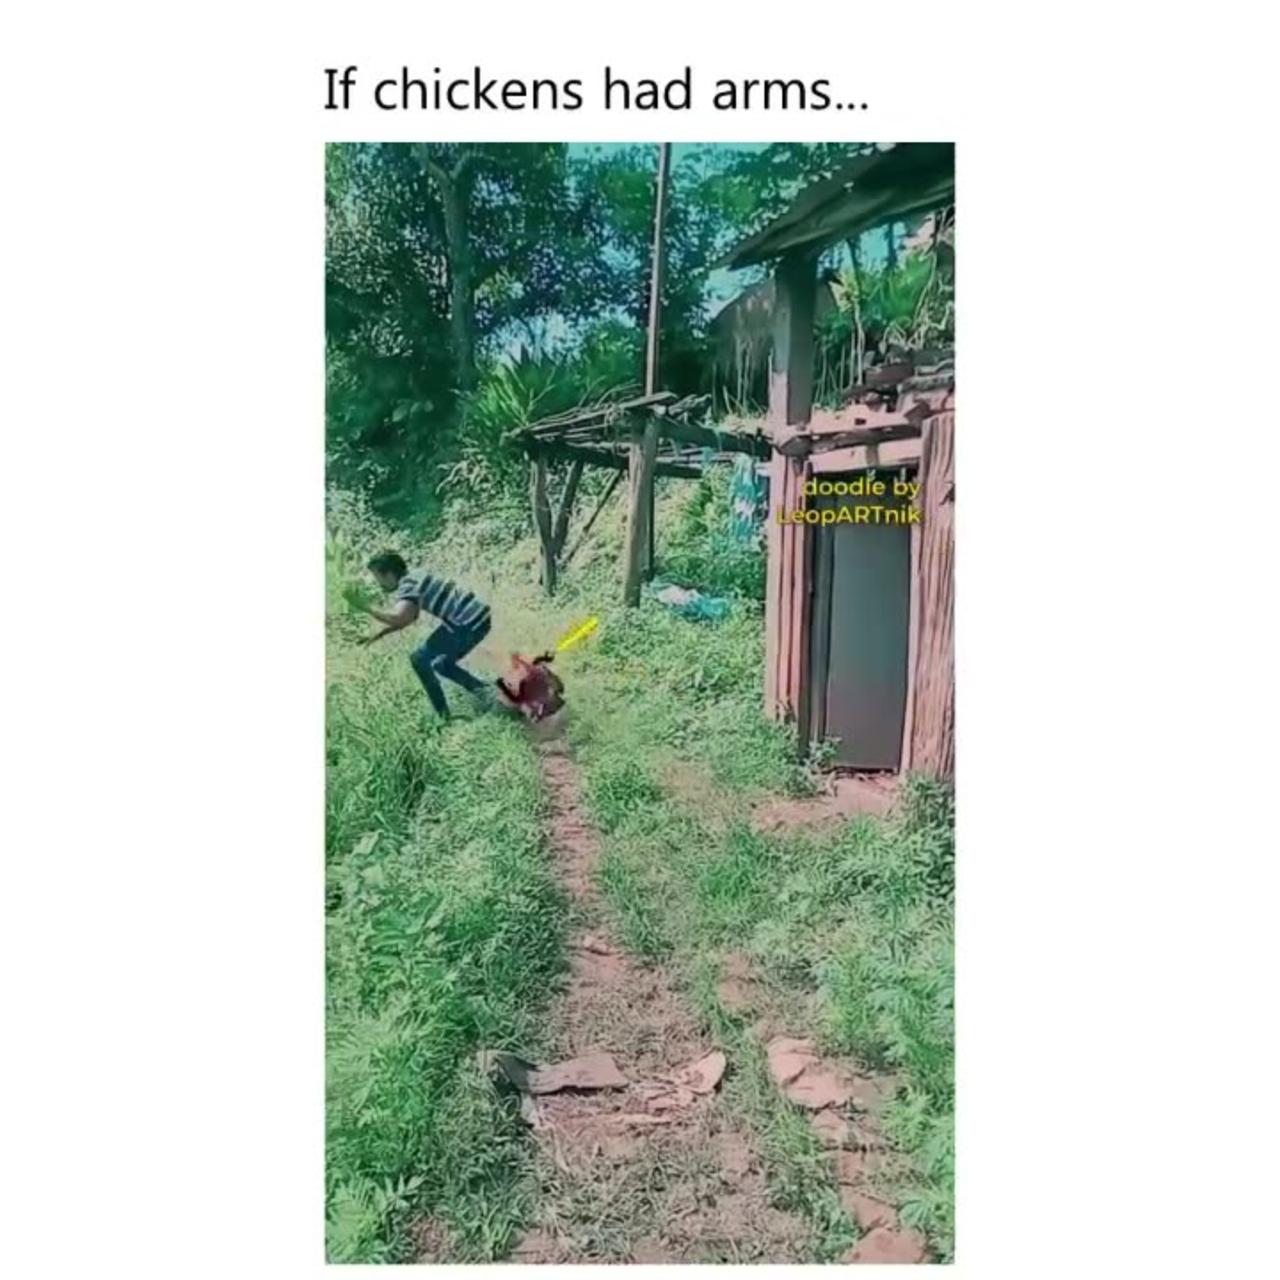 If checkens had arms